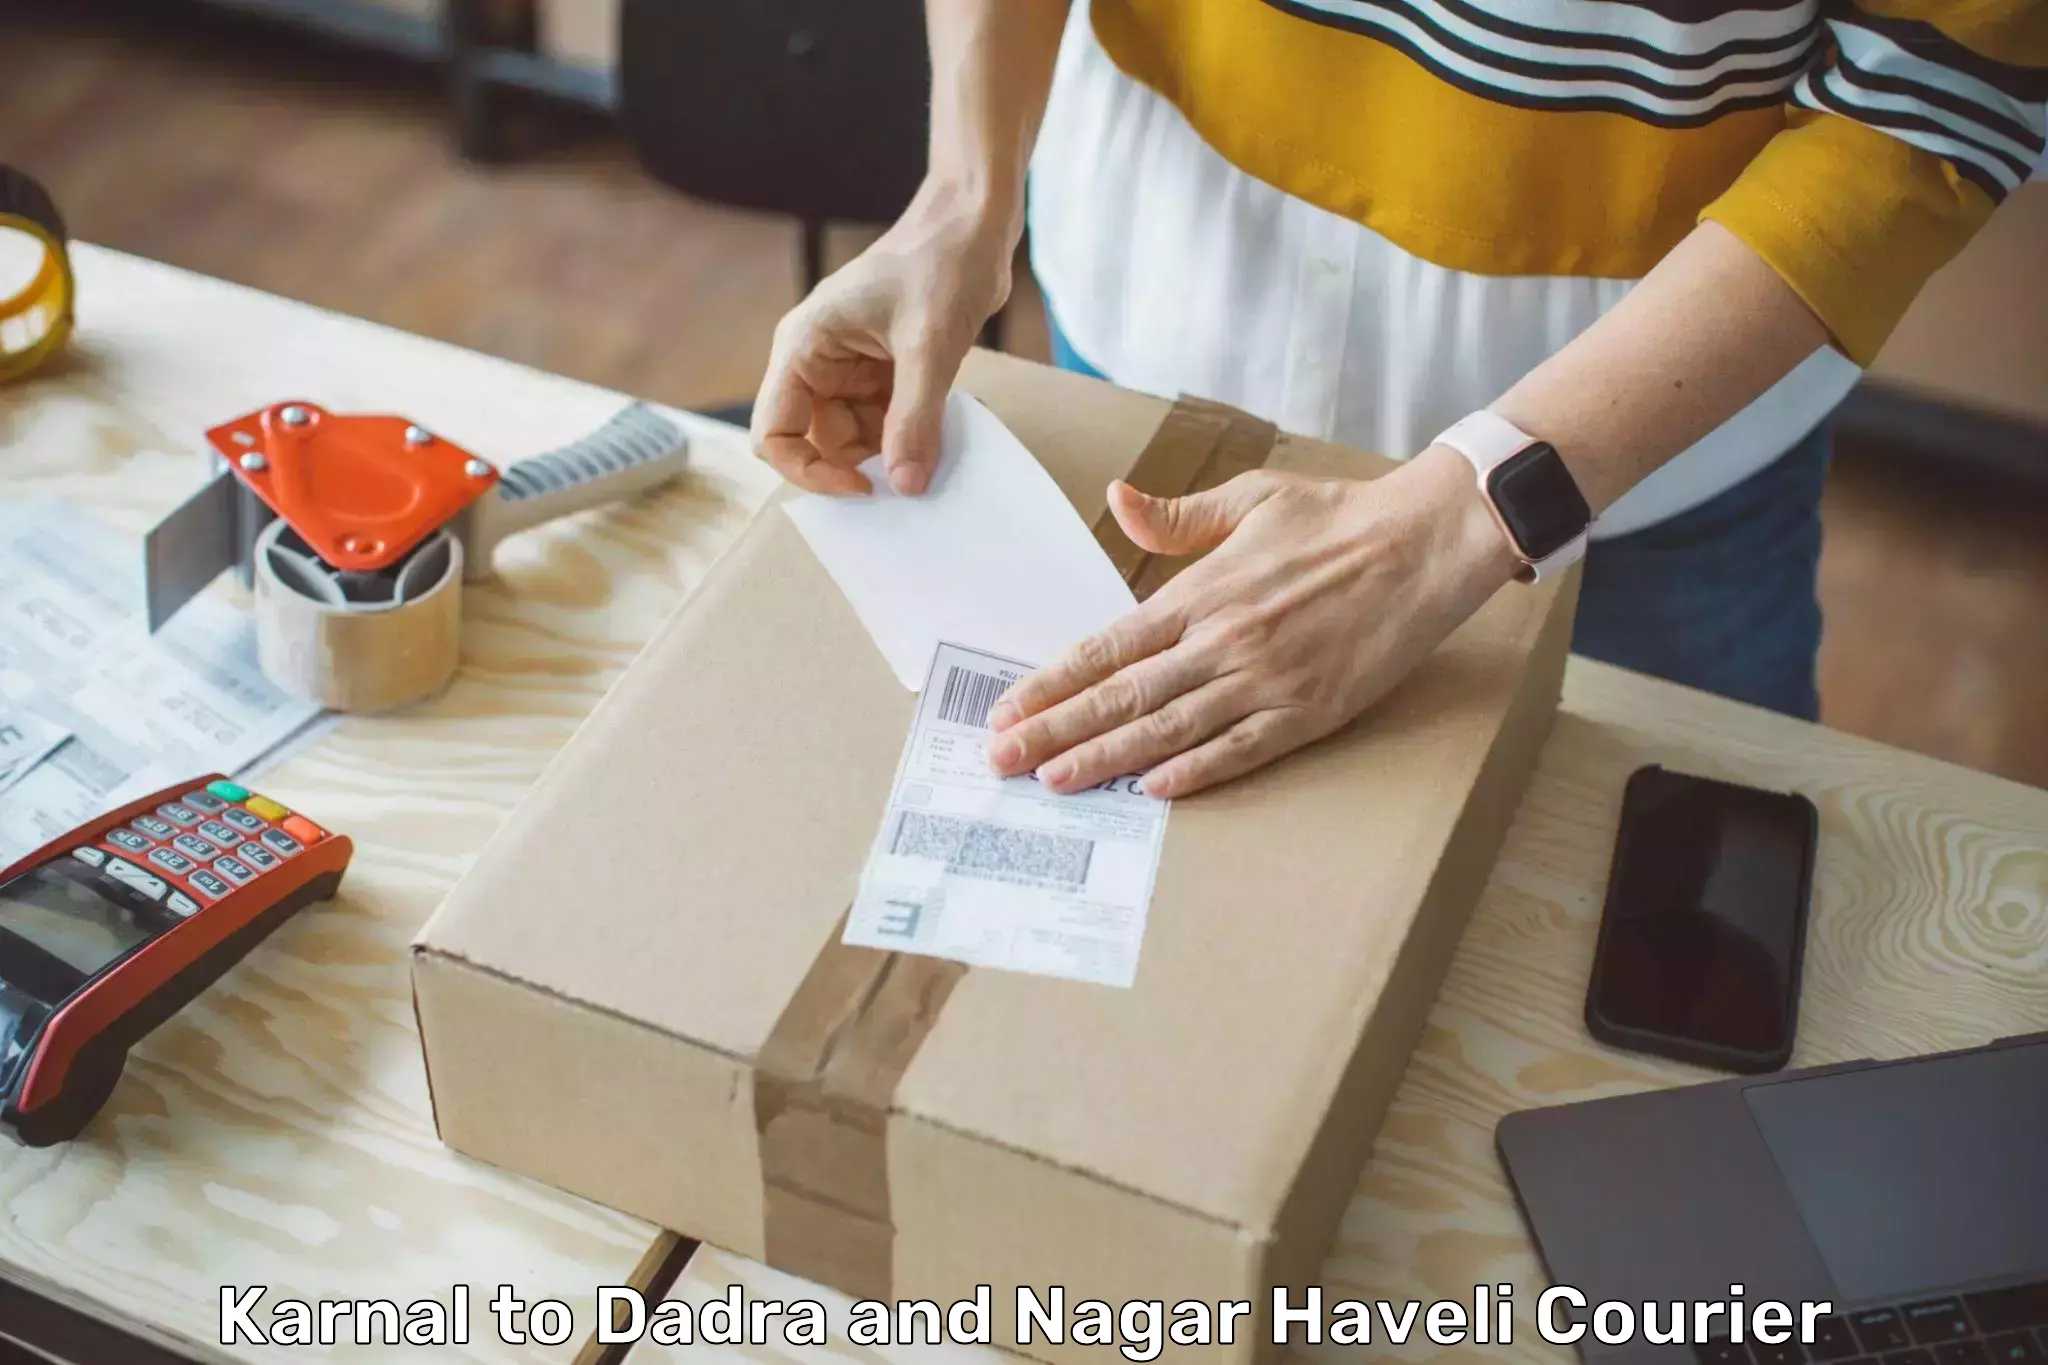 Flexible delivery schedules Karnal to Dadra and Nagar Haveli